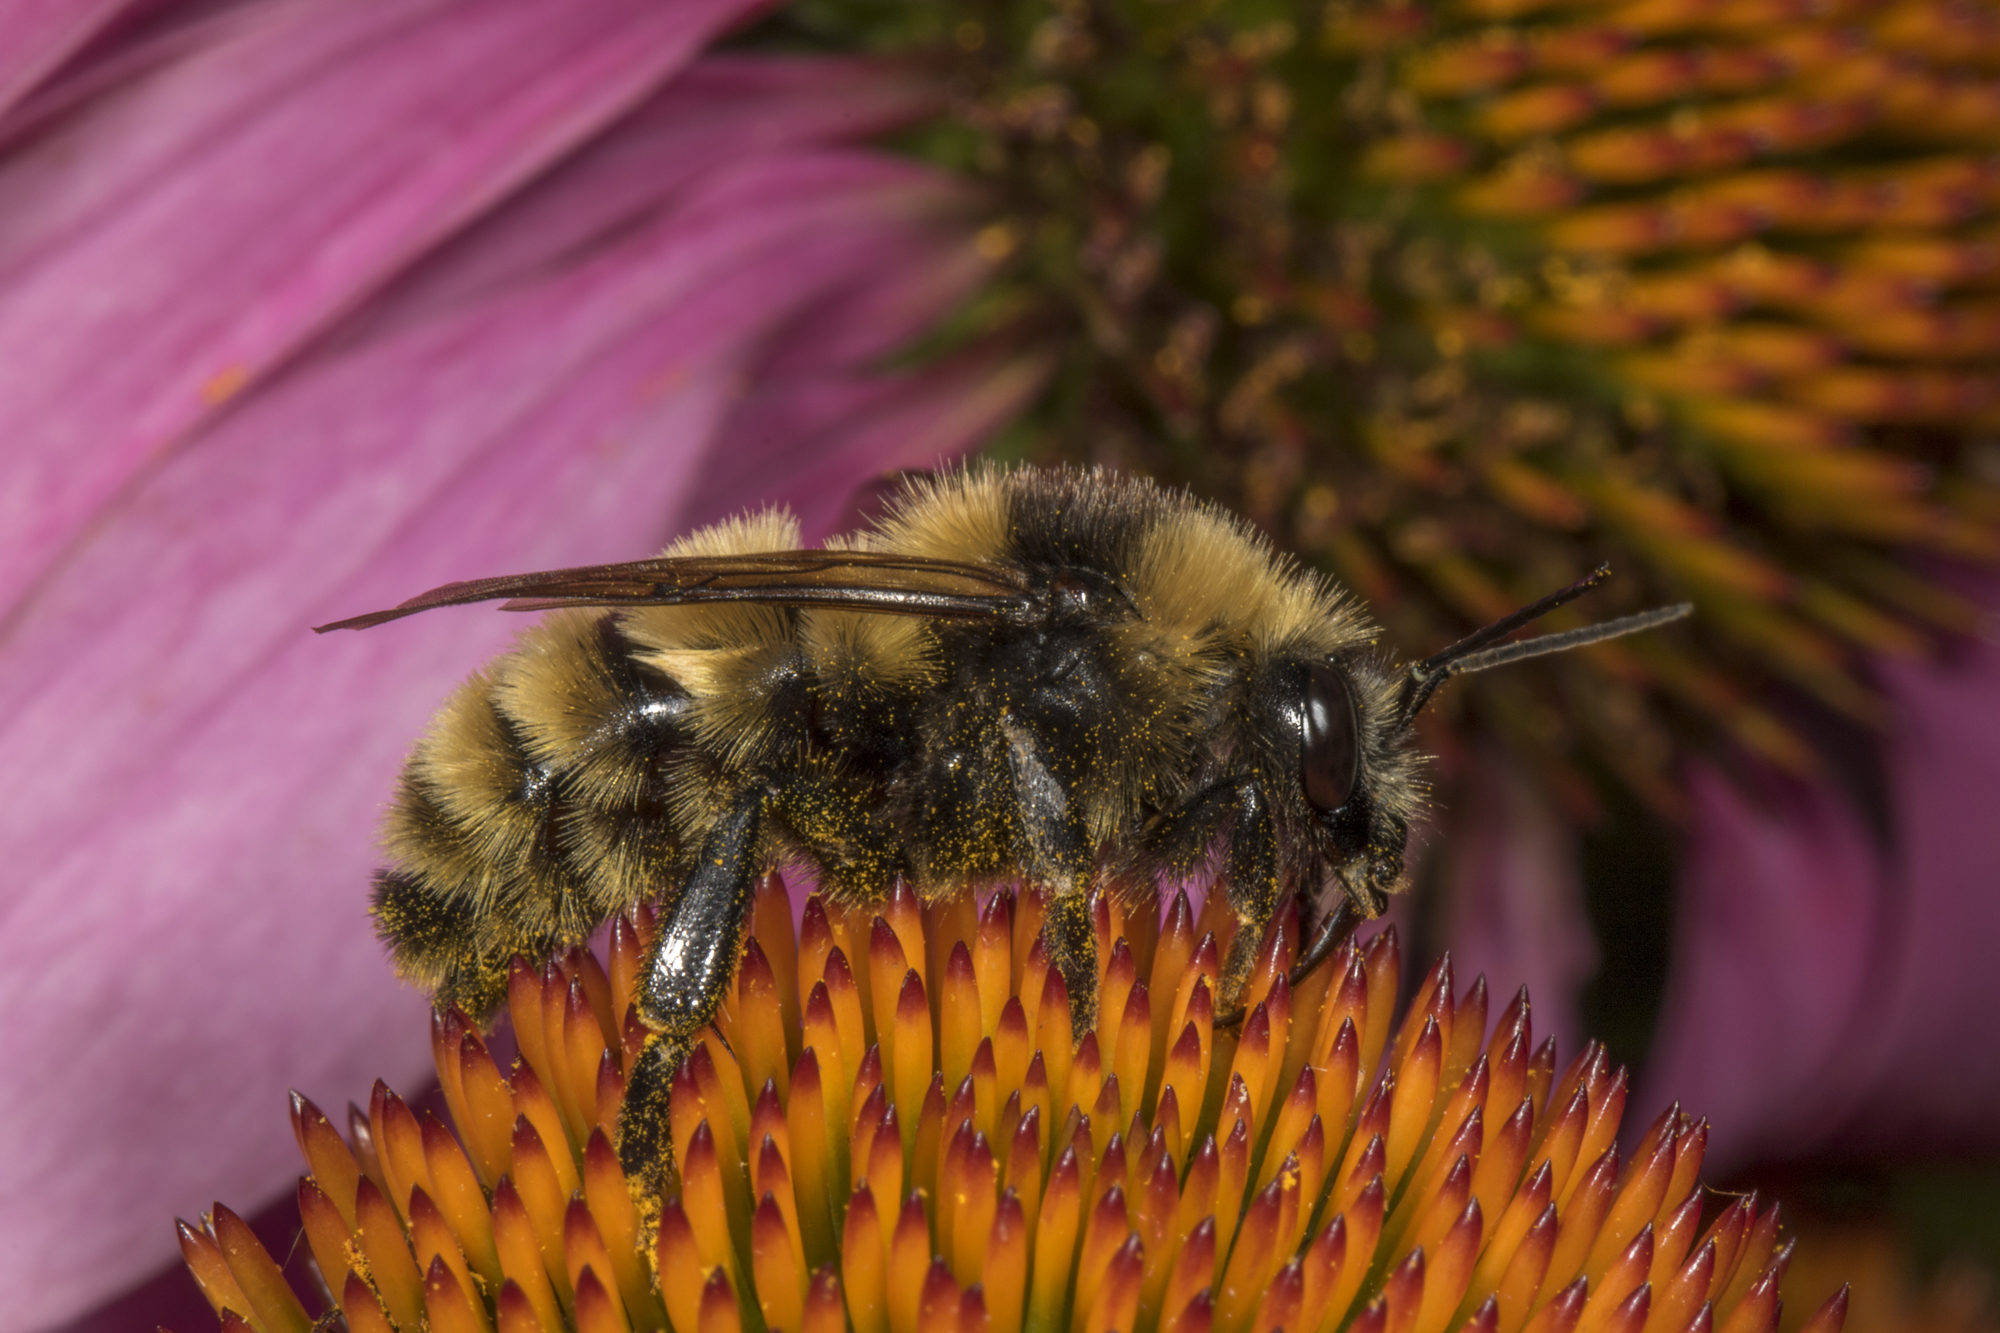 A drone Northern Amber Bumble Bee nectaring cone flower. © K.P. McFarland